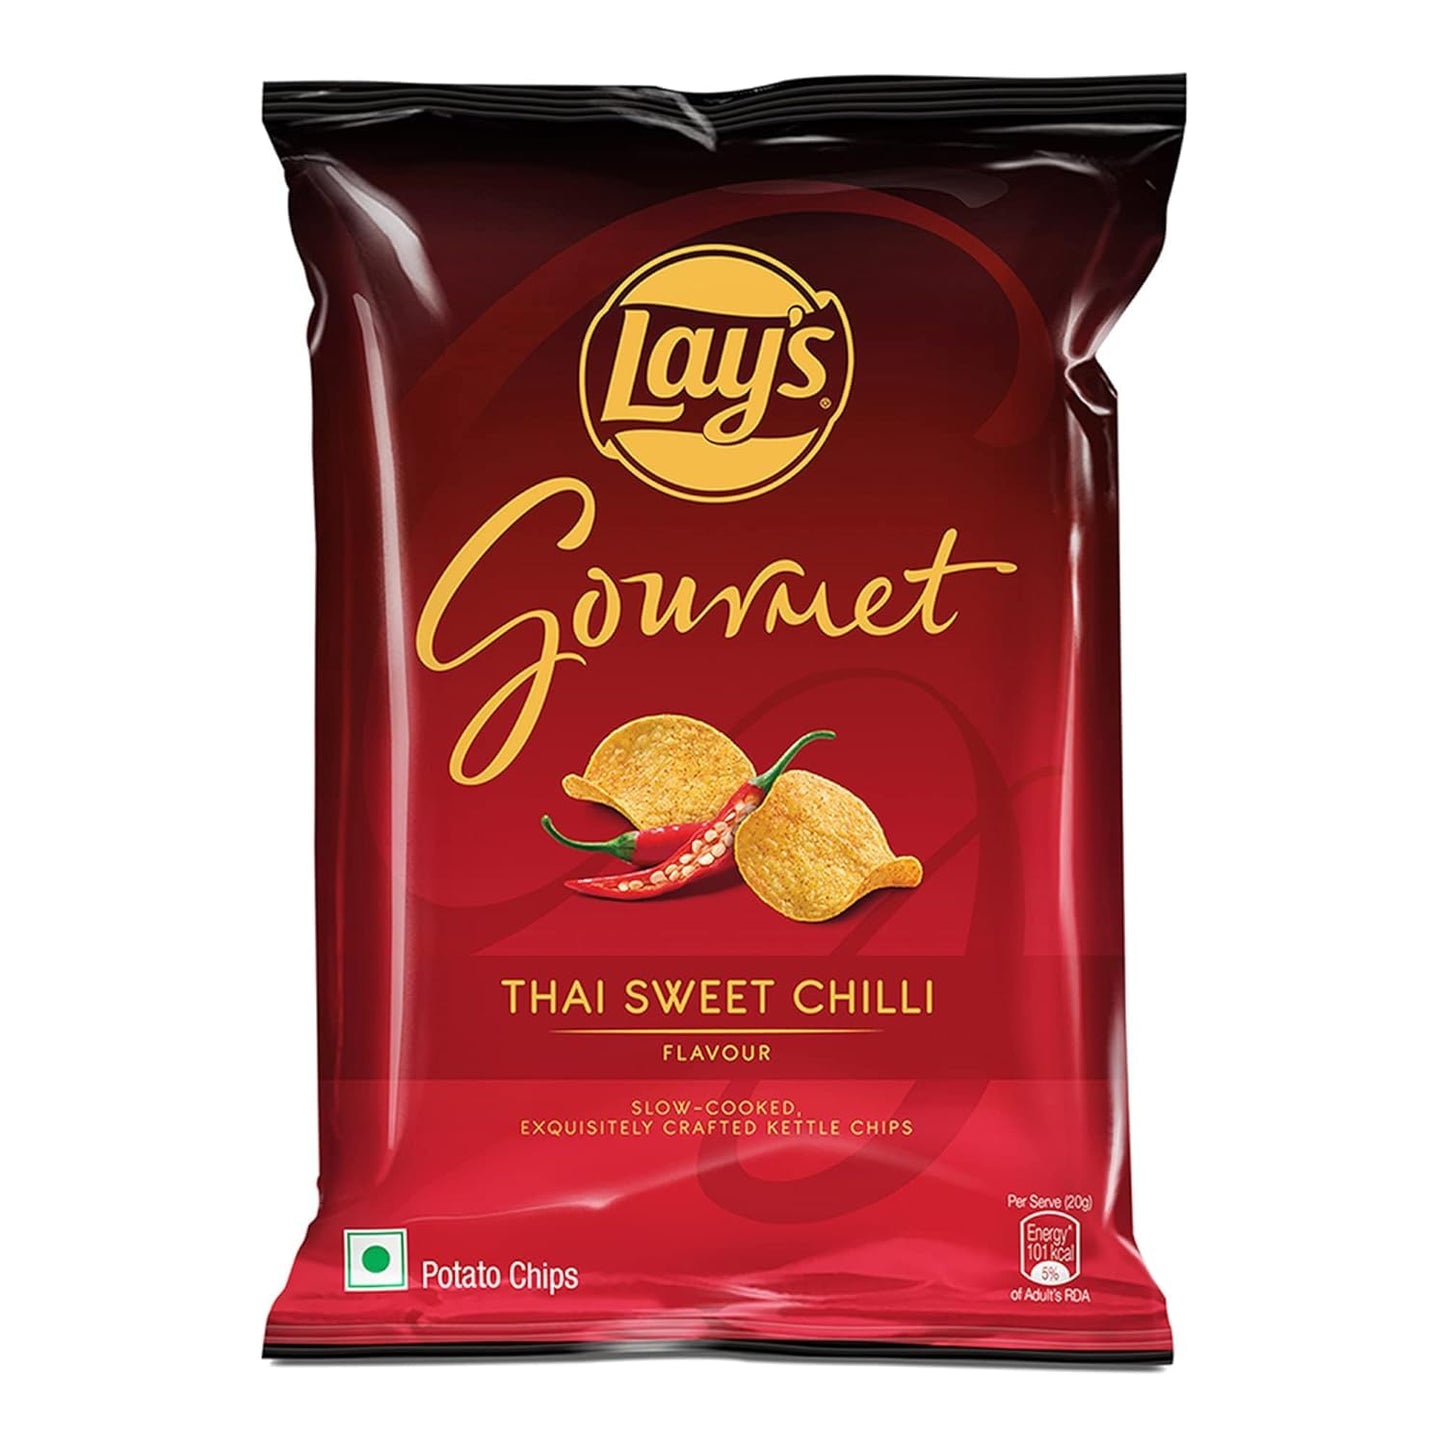 Lay's Gourmet Thia Sweet Chilli (55G) India (6 pack)